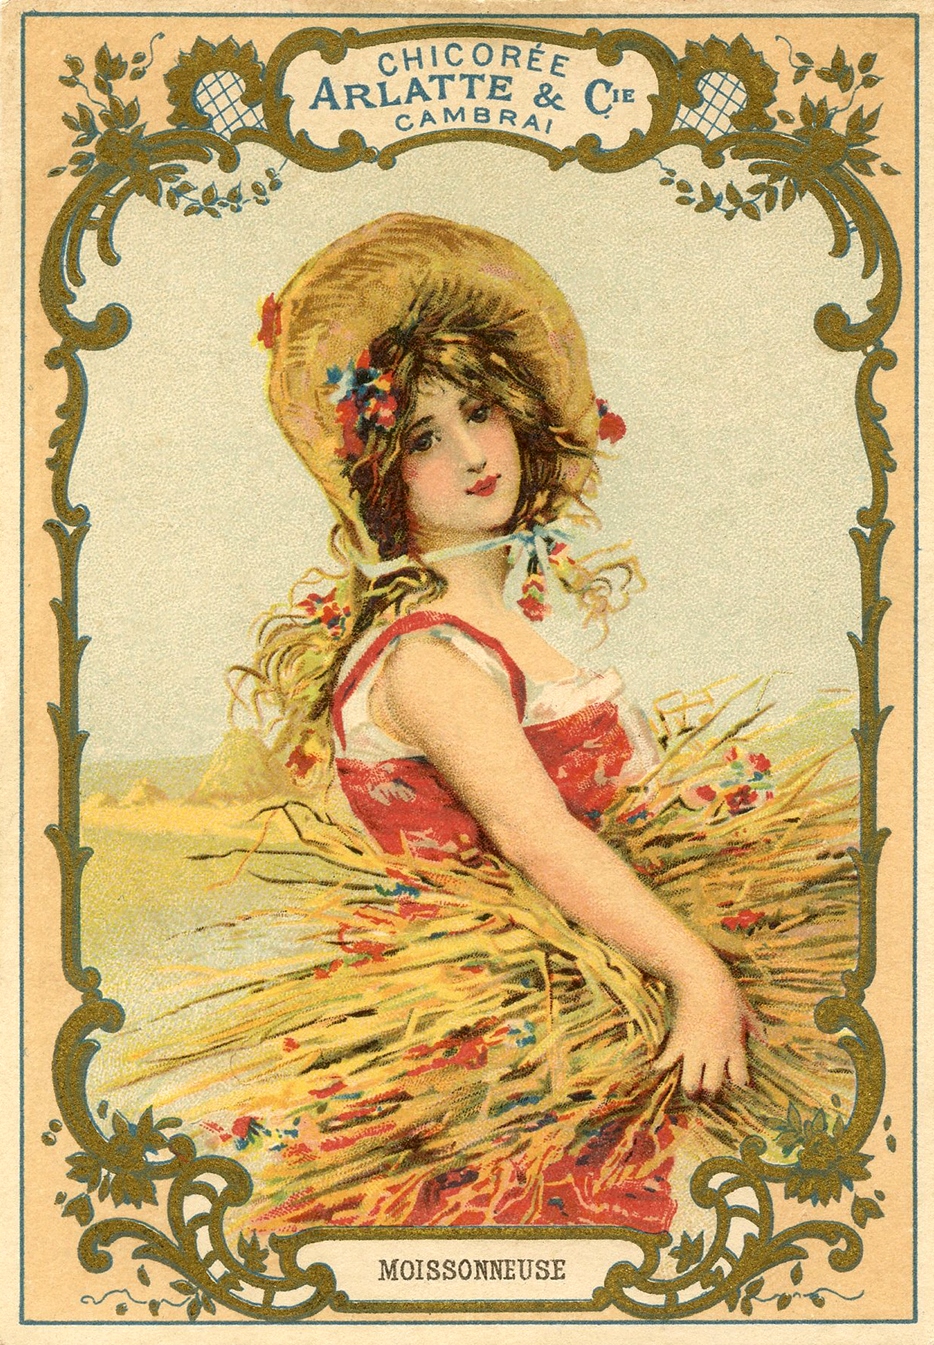 French advertising card of harvest woman